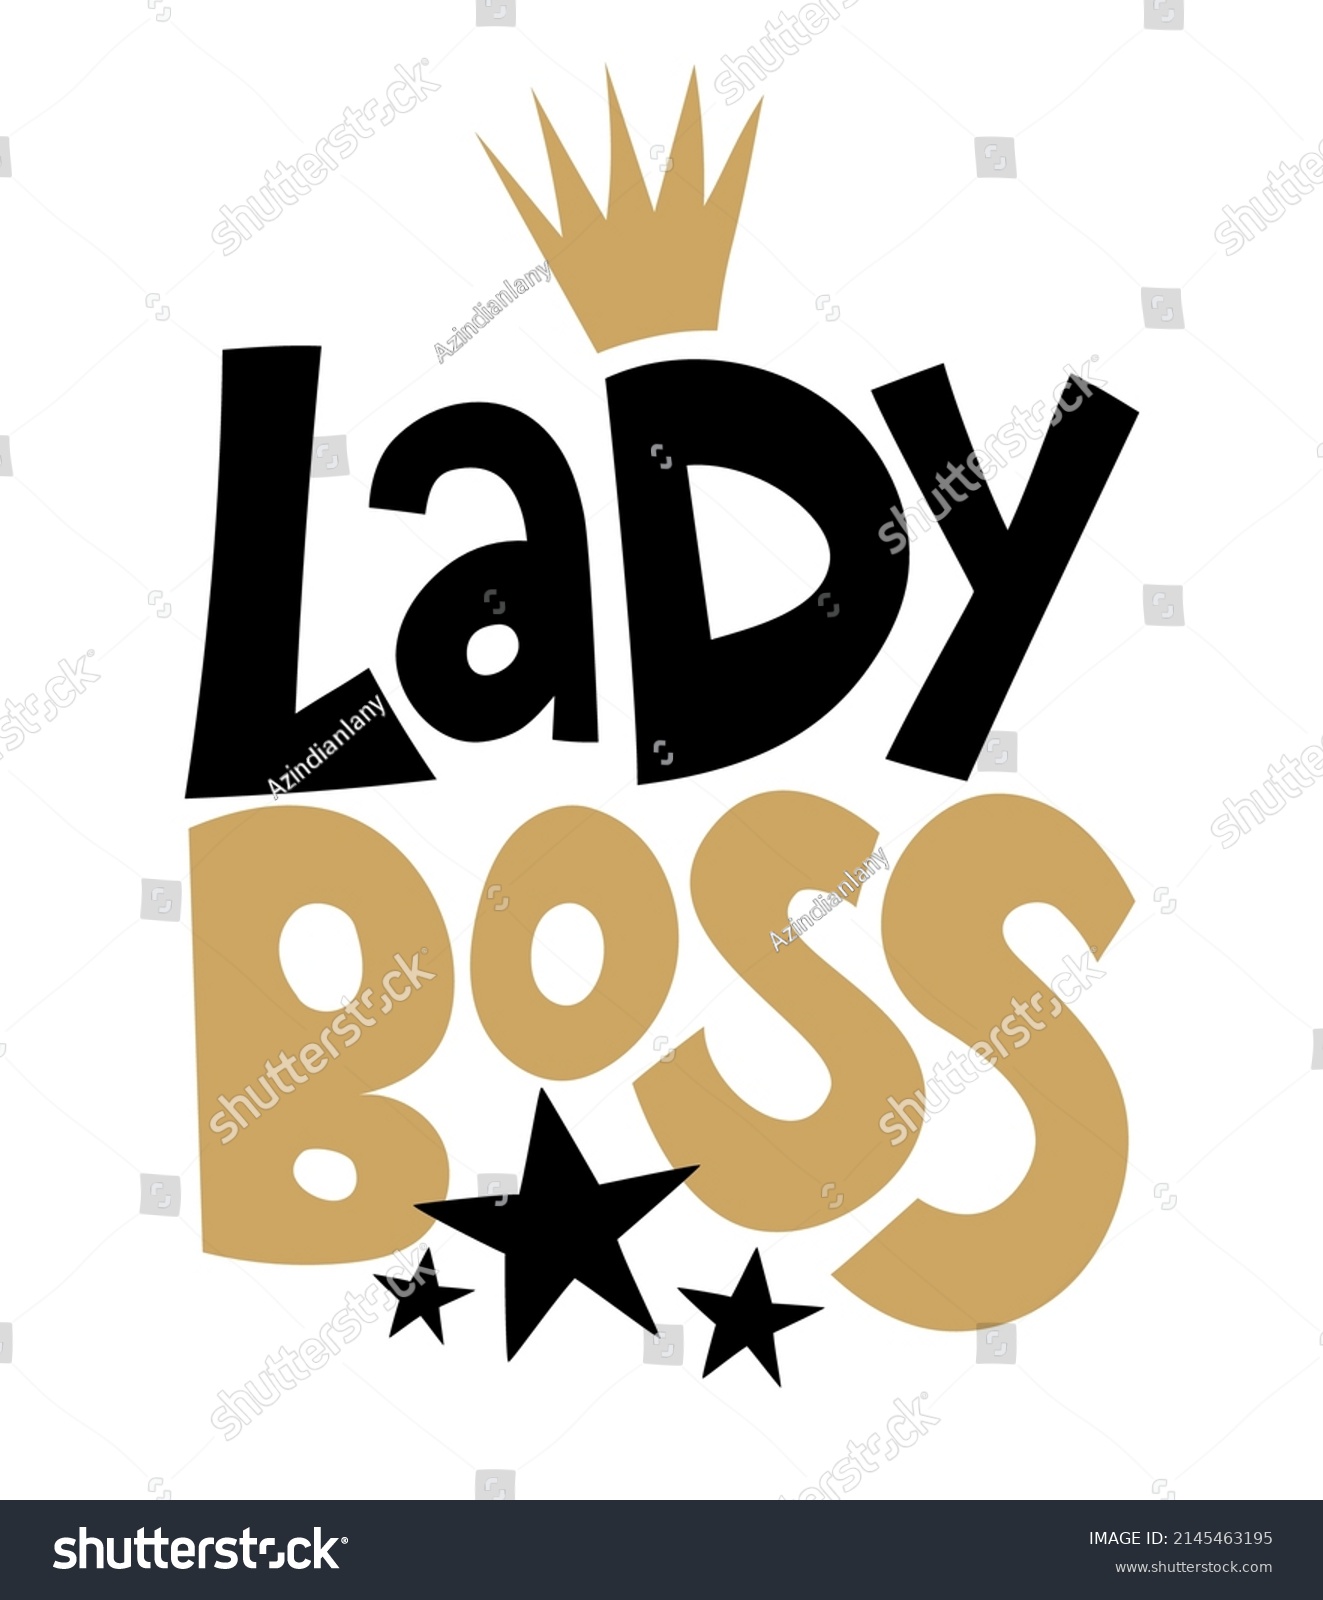 SVG of Lady boss - Feminism slogan with hand drawn lettering. Print for poster, card. Stylish girl text with motivational symbols. Vector illustration.  svg